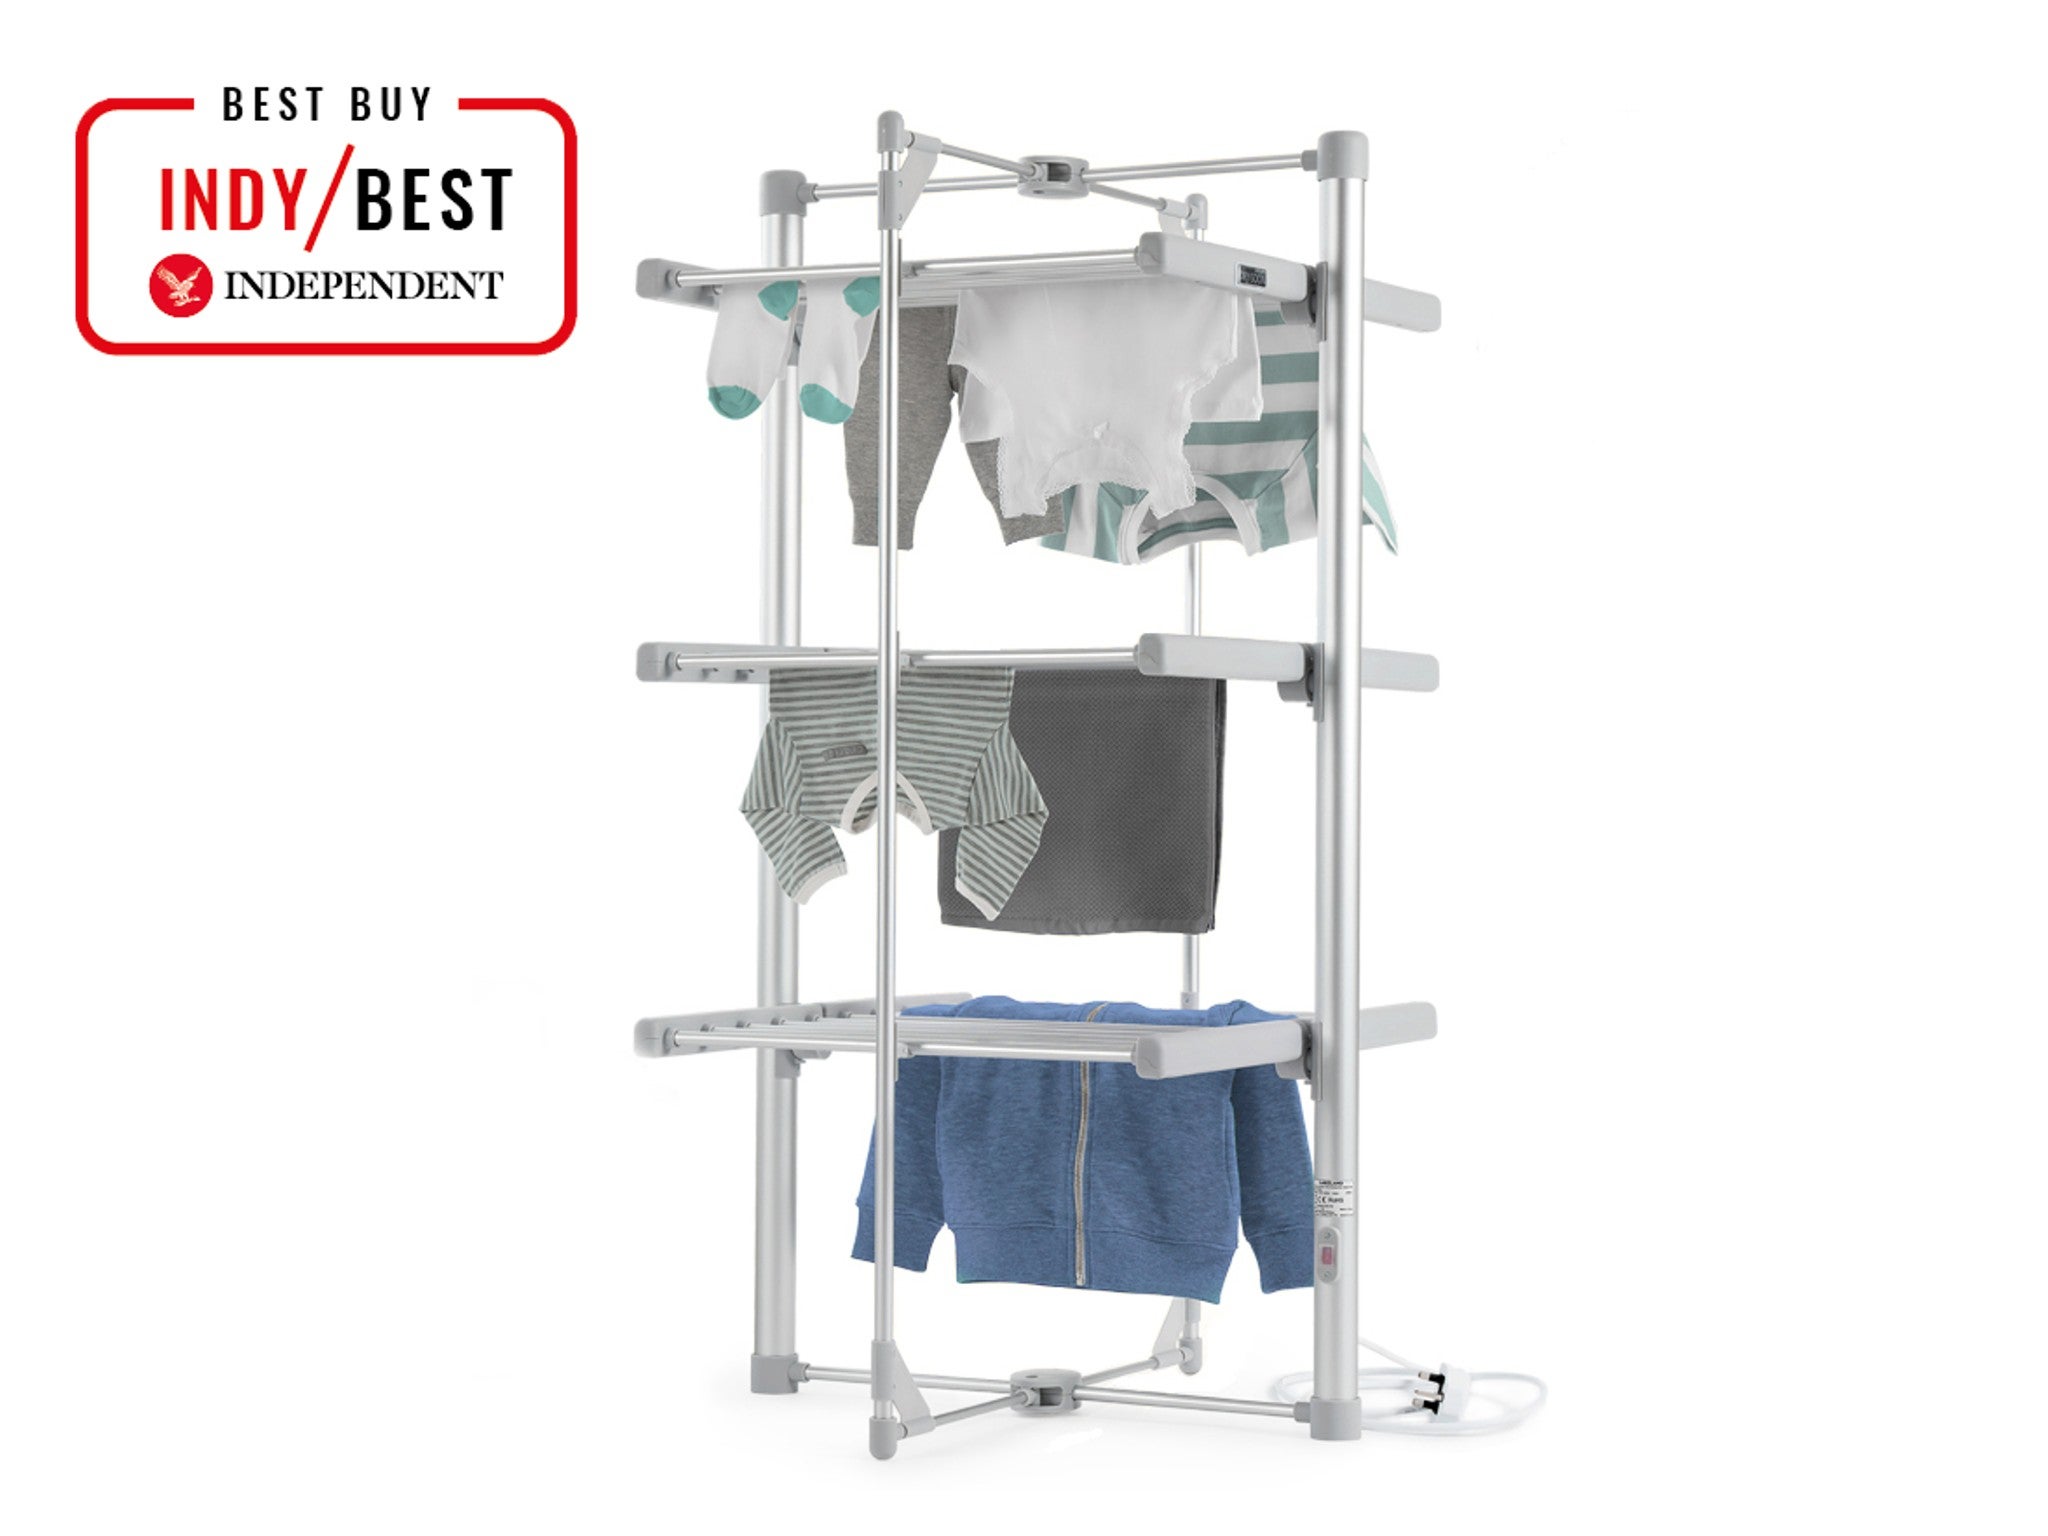 Electric Heated Clothes Airer Dryer Hanging Laundry Drying Indoor Zip Up Cover 